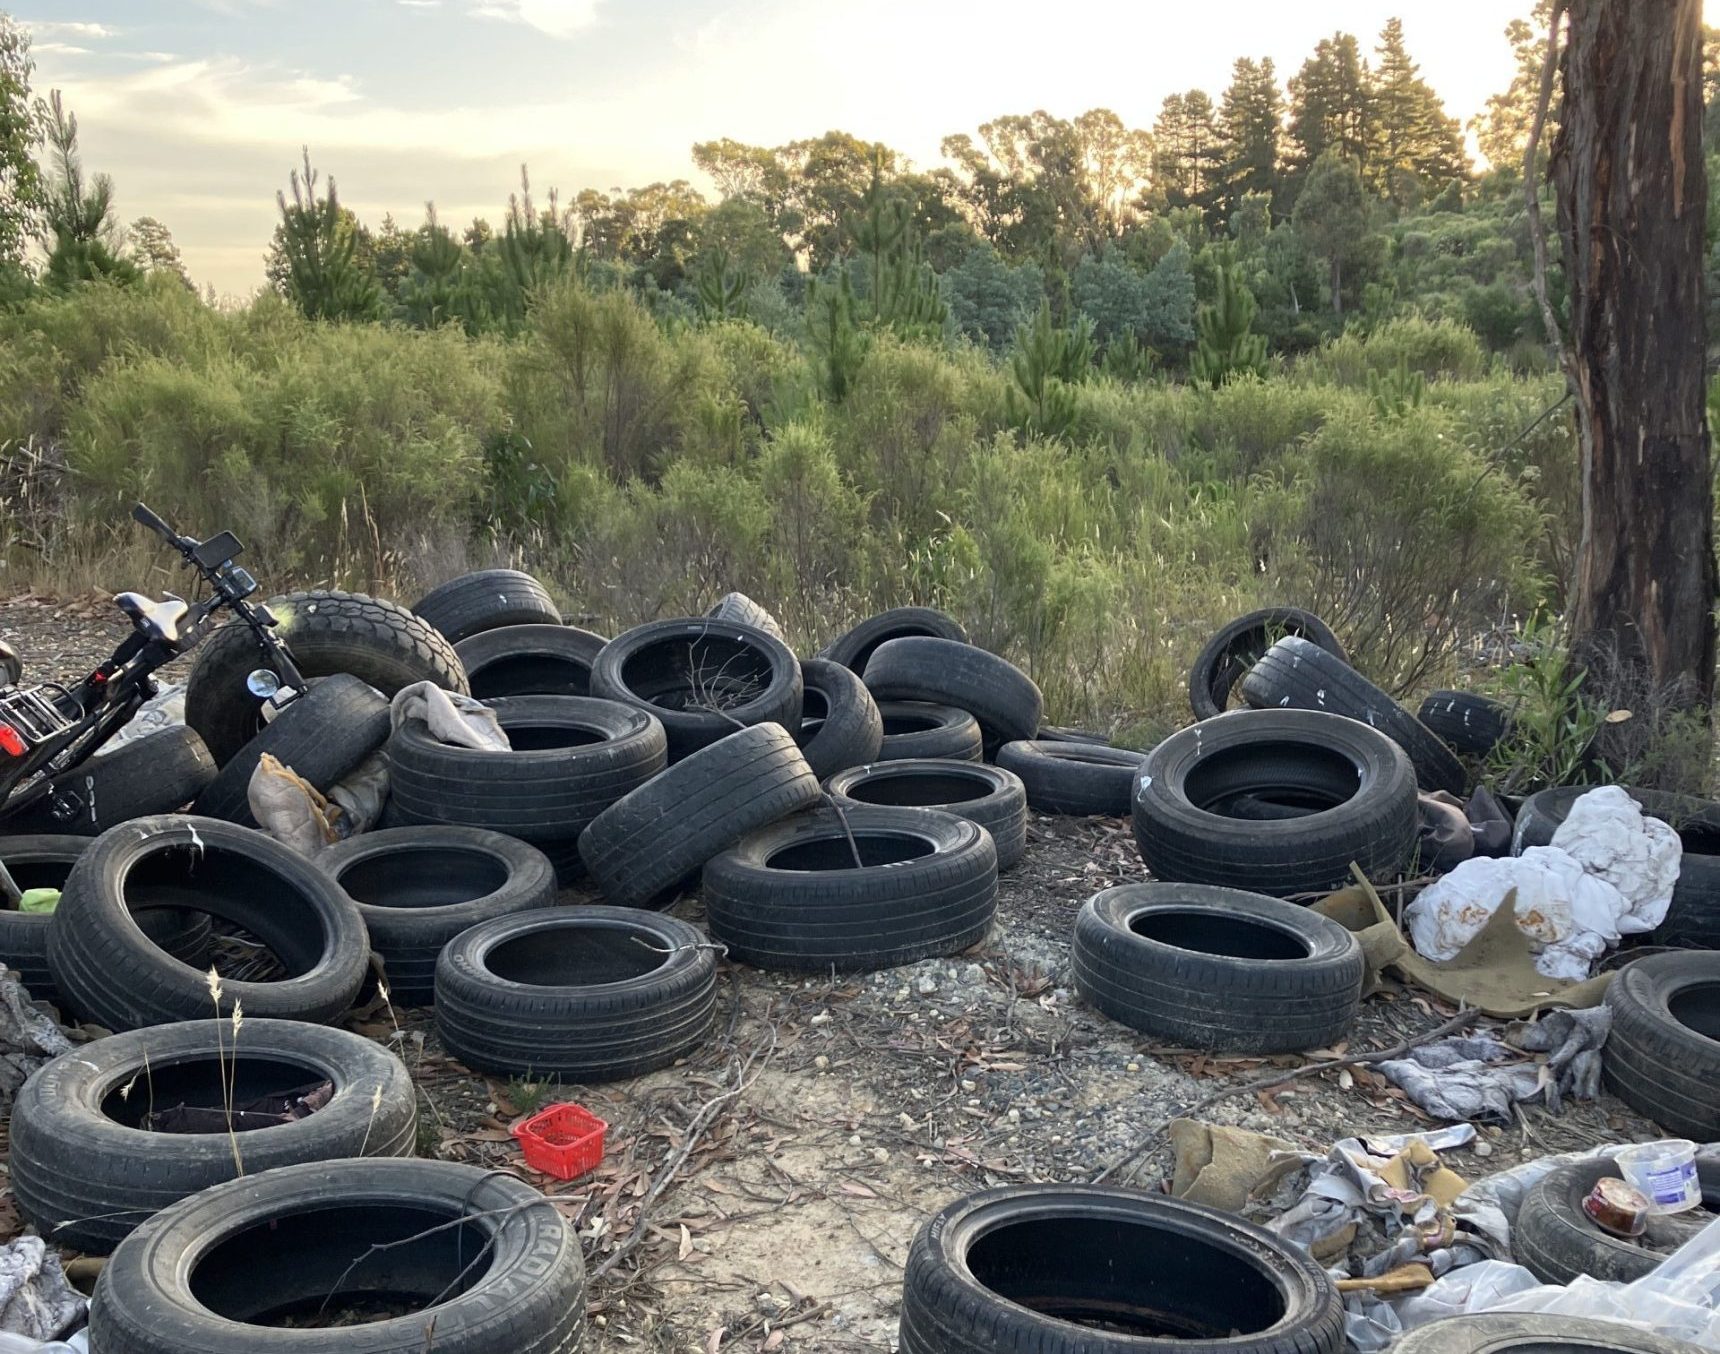 EPA Victoria: Waste tyres are your business: don’t get caught out